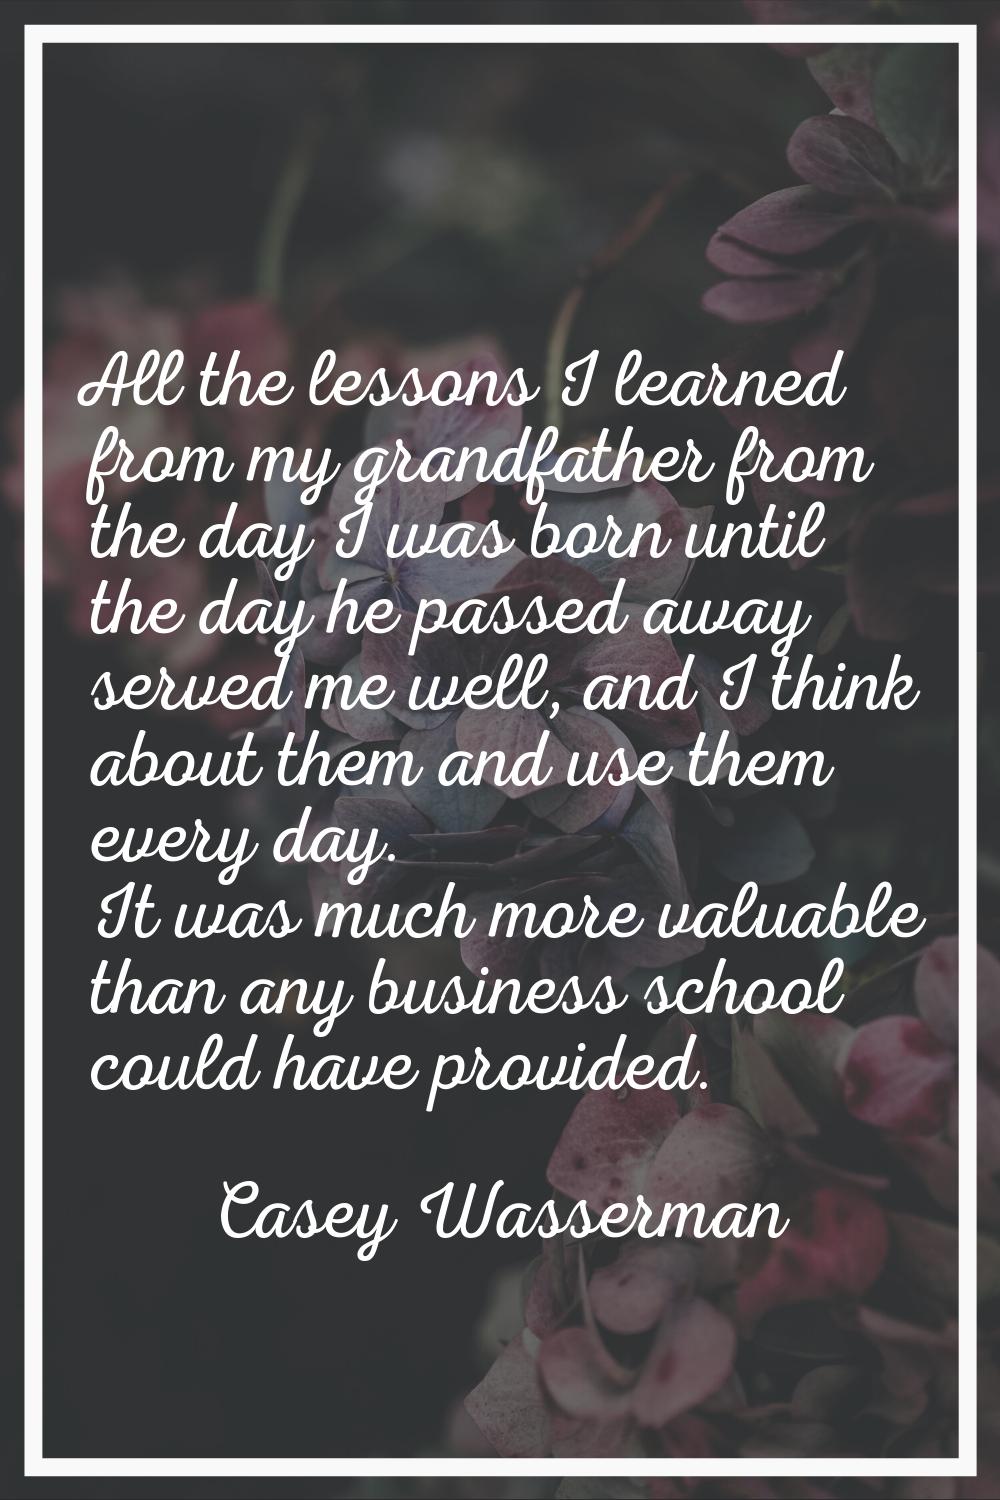 All the lessons I learned from my grandfather from the day I was born until the day he passed away 